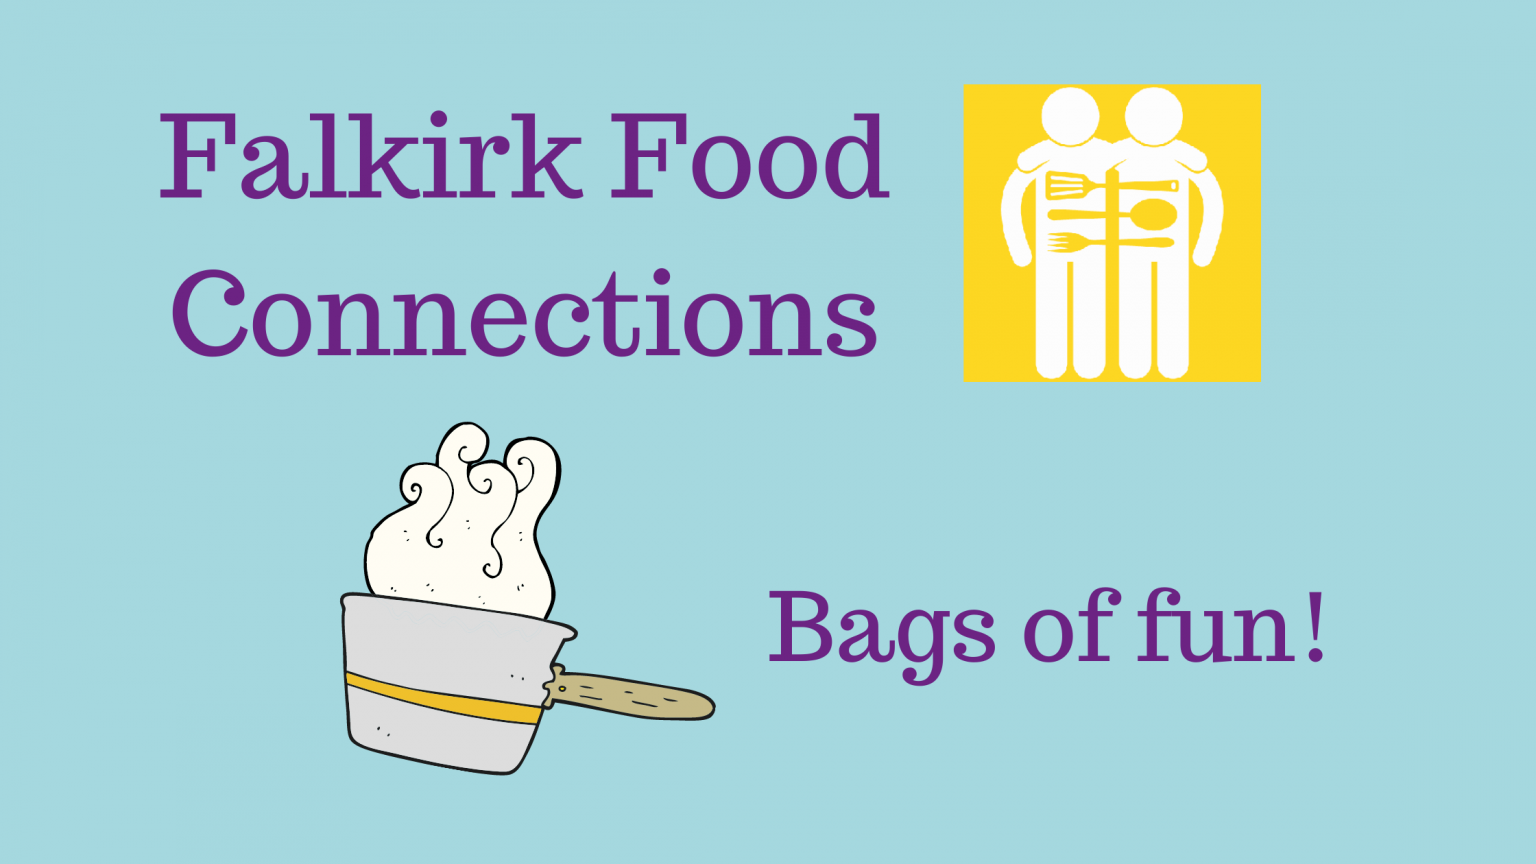 Falkirk food connections - bags of fun